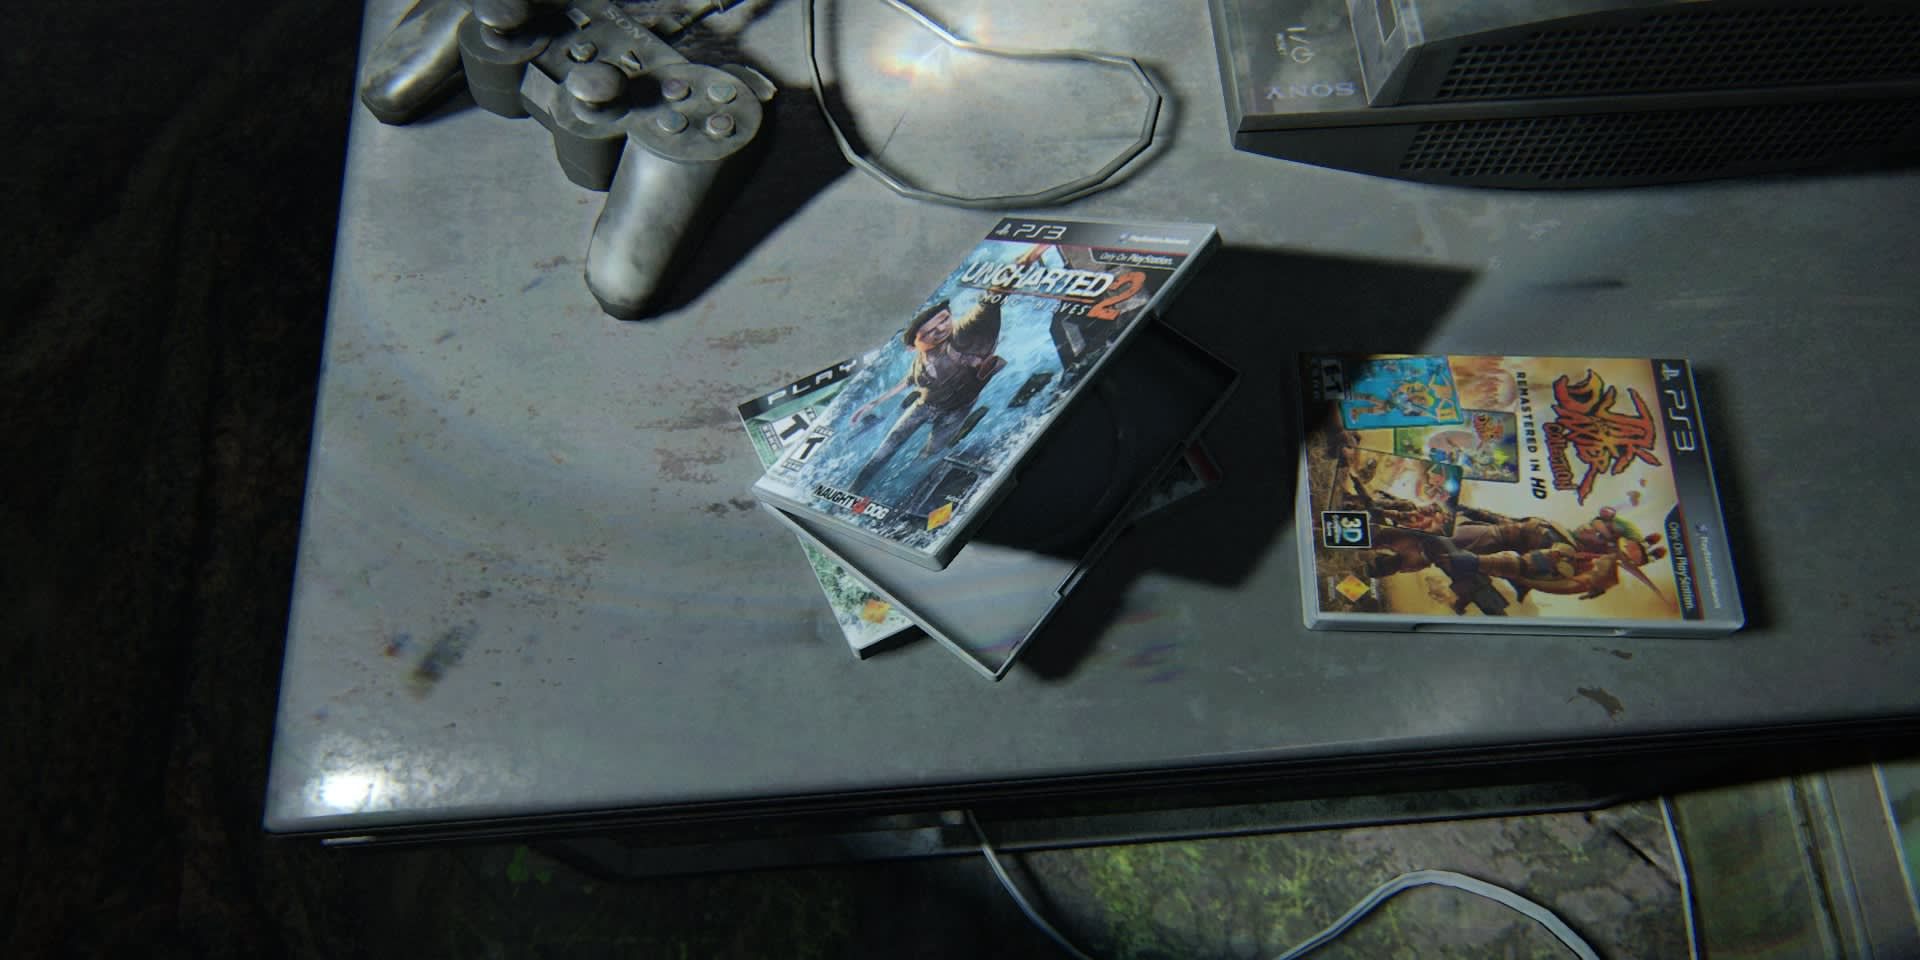 Uncharted 2: Among Thieves stacked on top of Uncharted: Drake's Fortune alongside the Jak & Daxter Collection in The Last of Us Part II